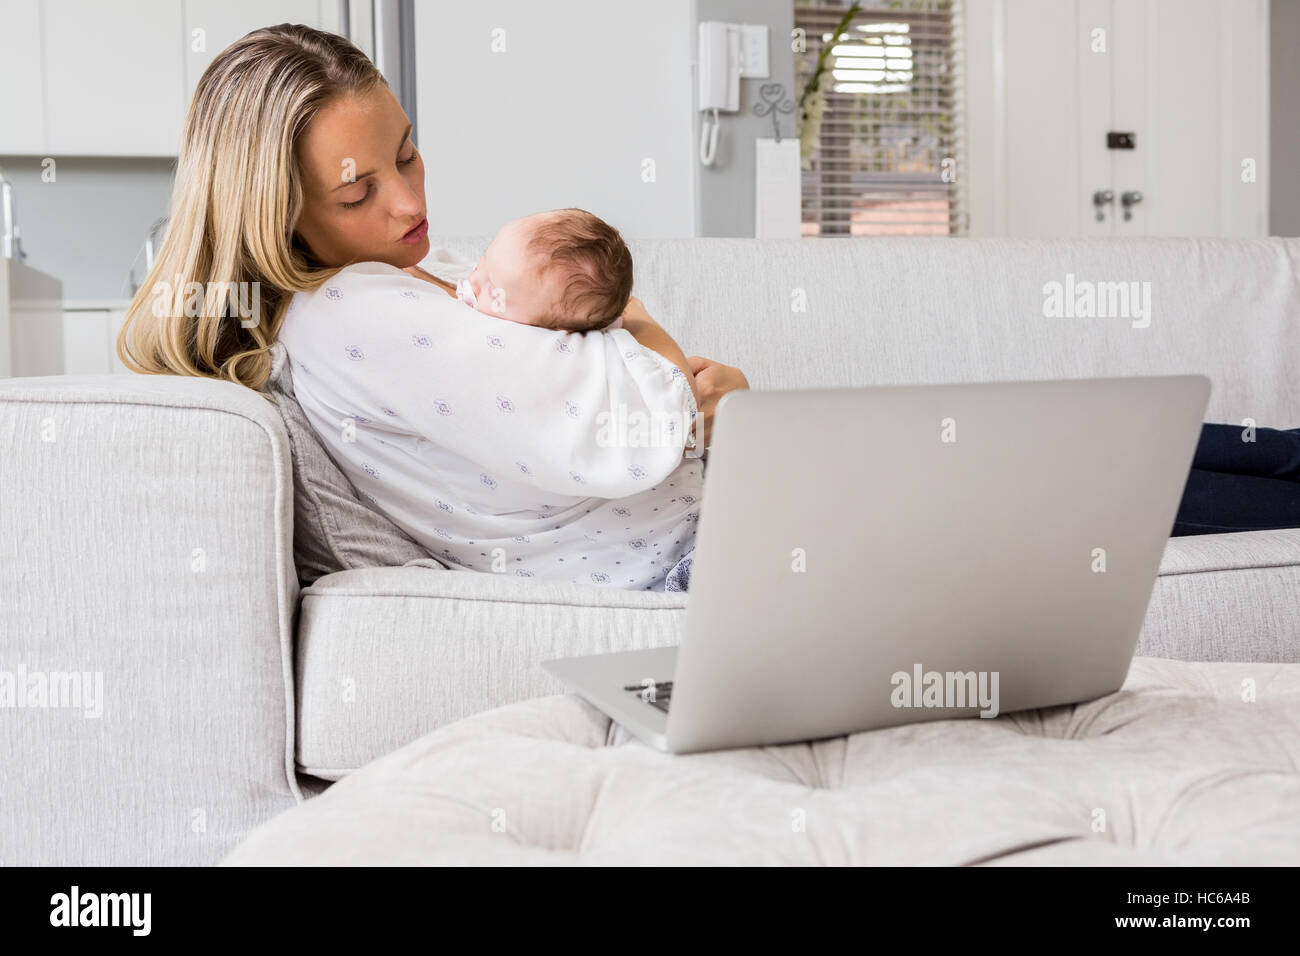 Mother consoling her baby in living room Stock Photo